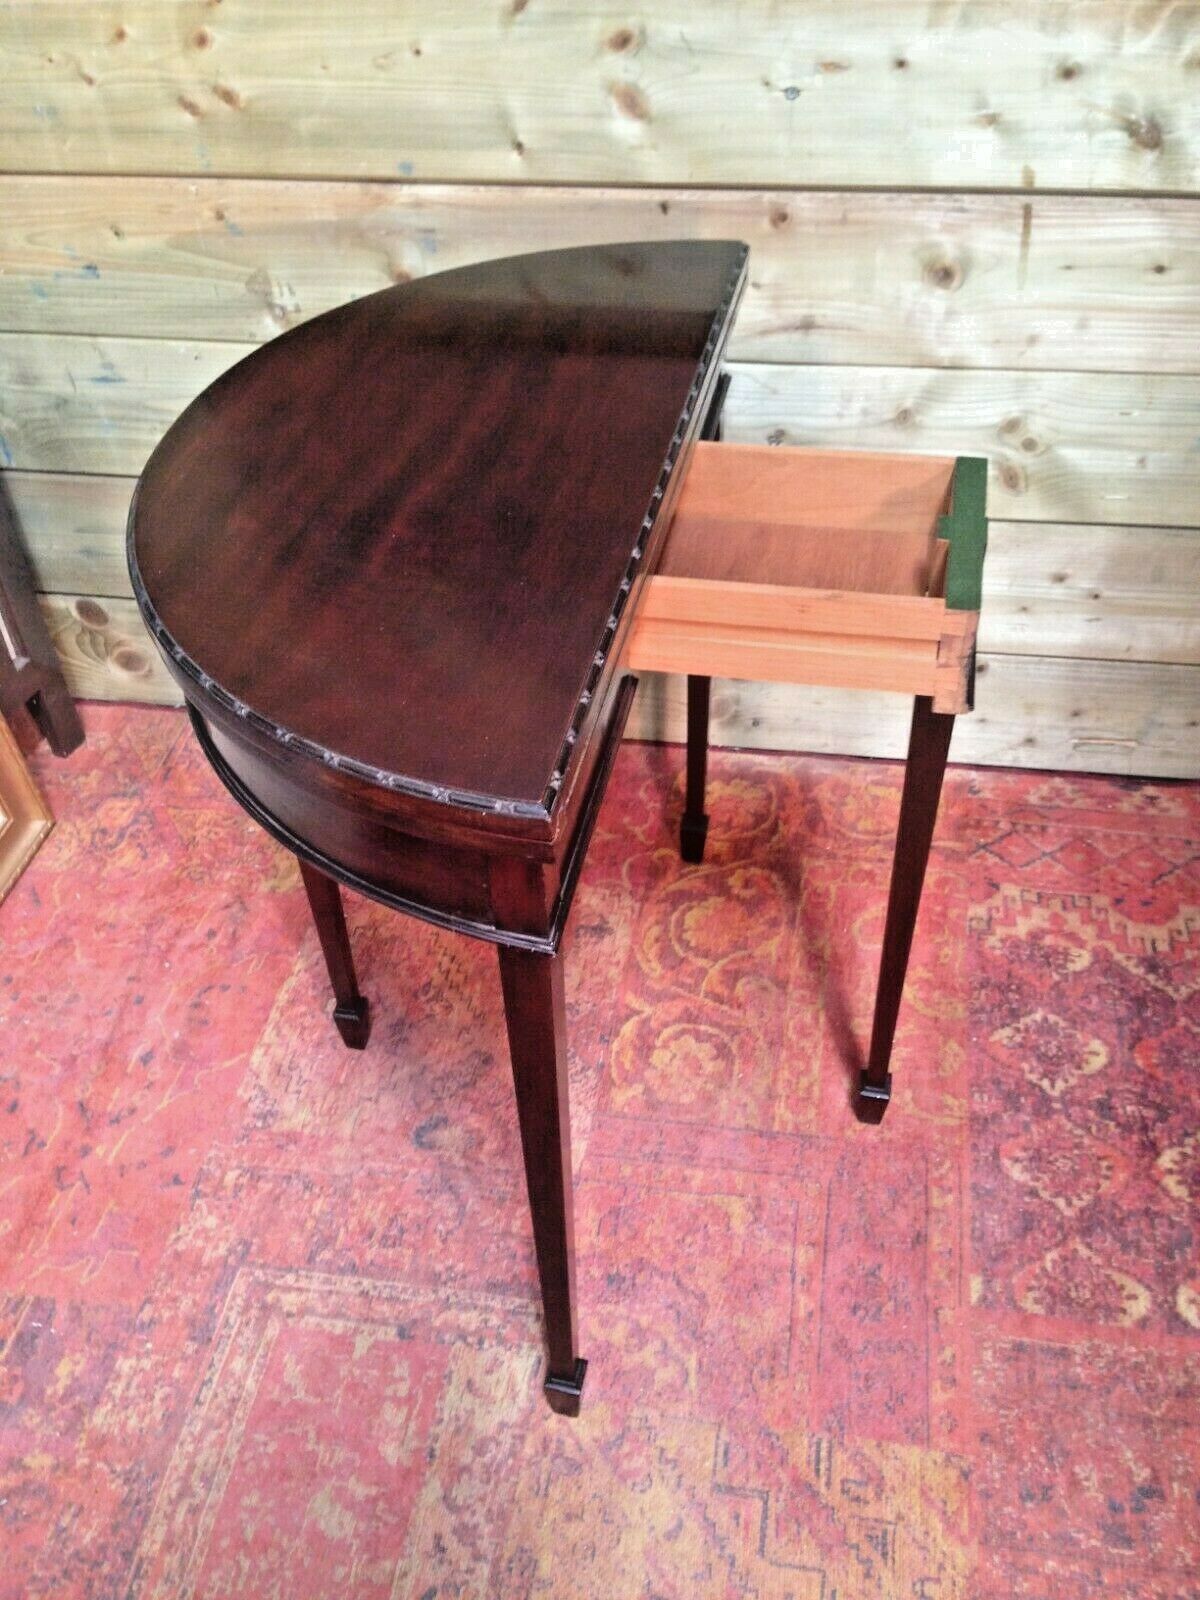 Mahogany Dem Lune Card Table / Vintage Hall Table ( SOLD )